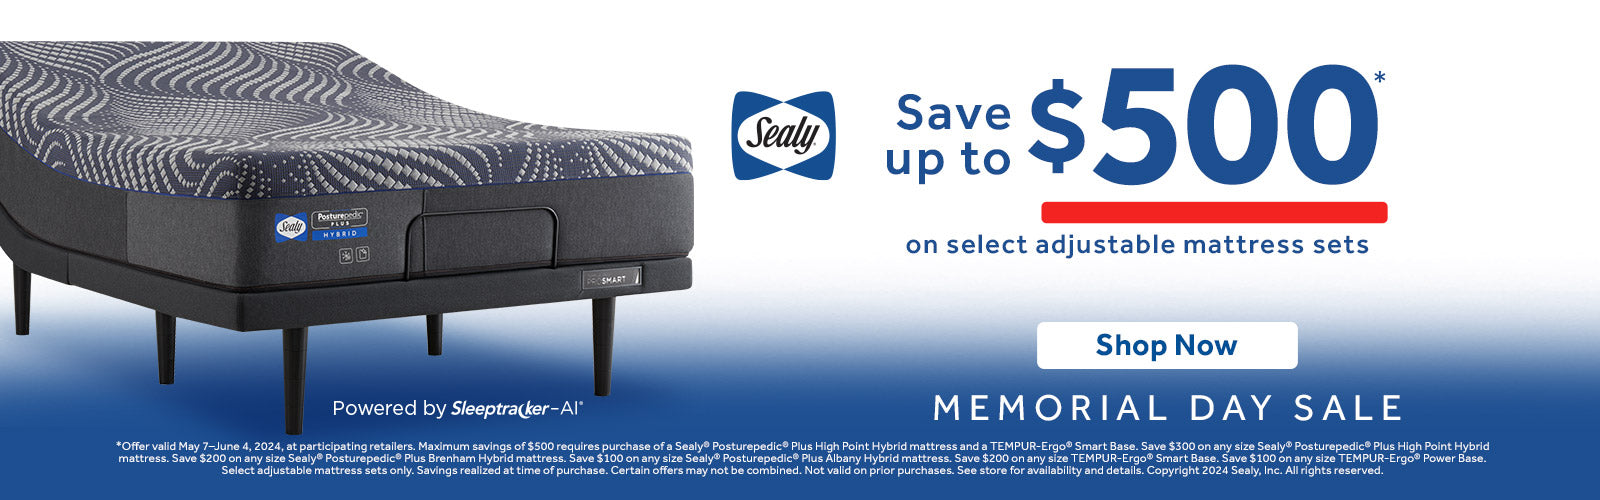 Sealy Memorial Day Sale - Save up to $500 on Select Adjustable Mattress Sets